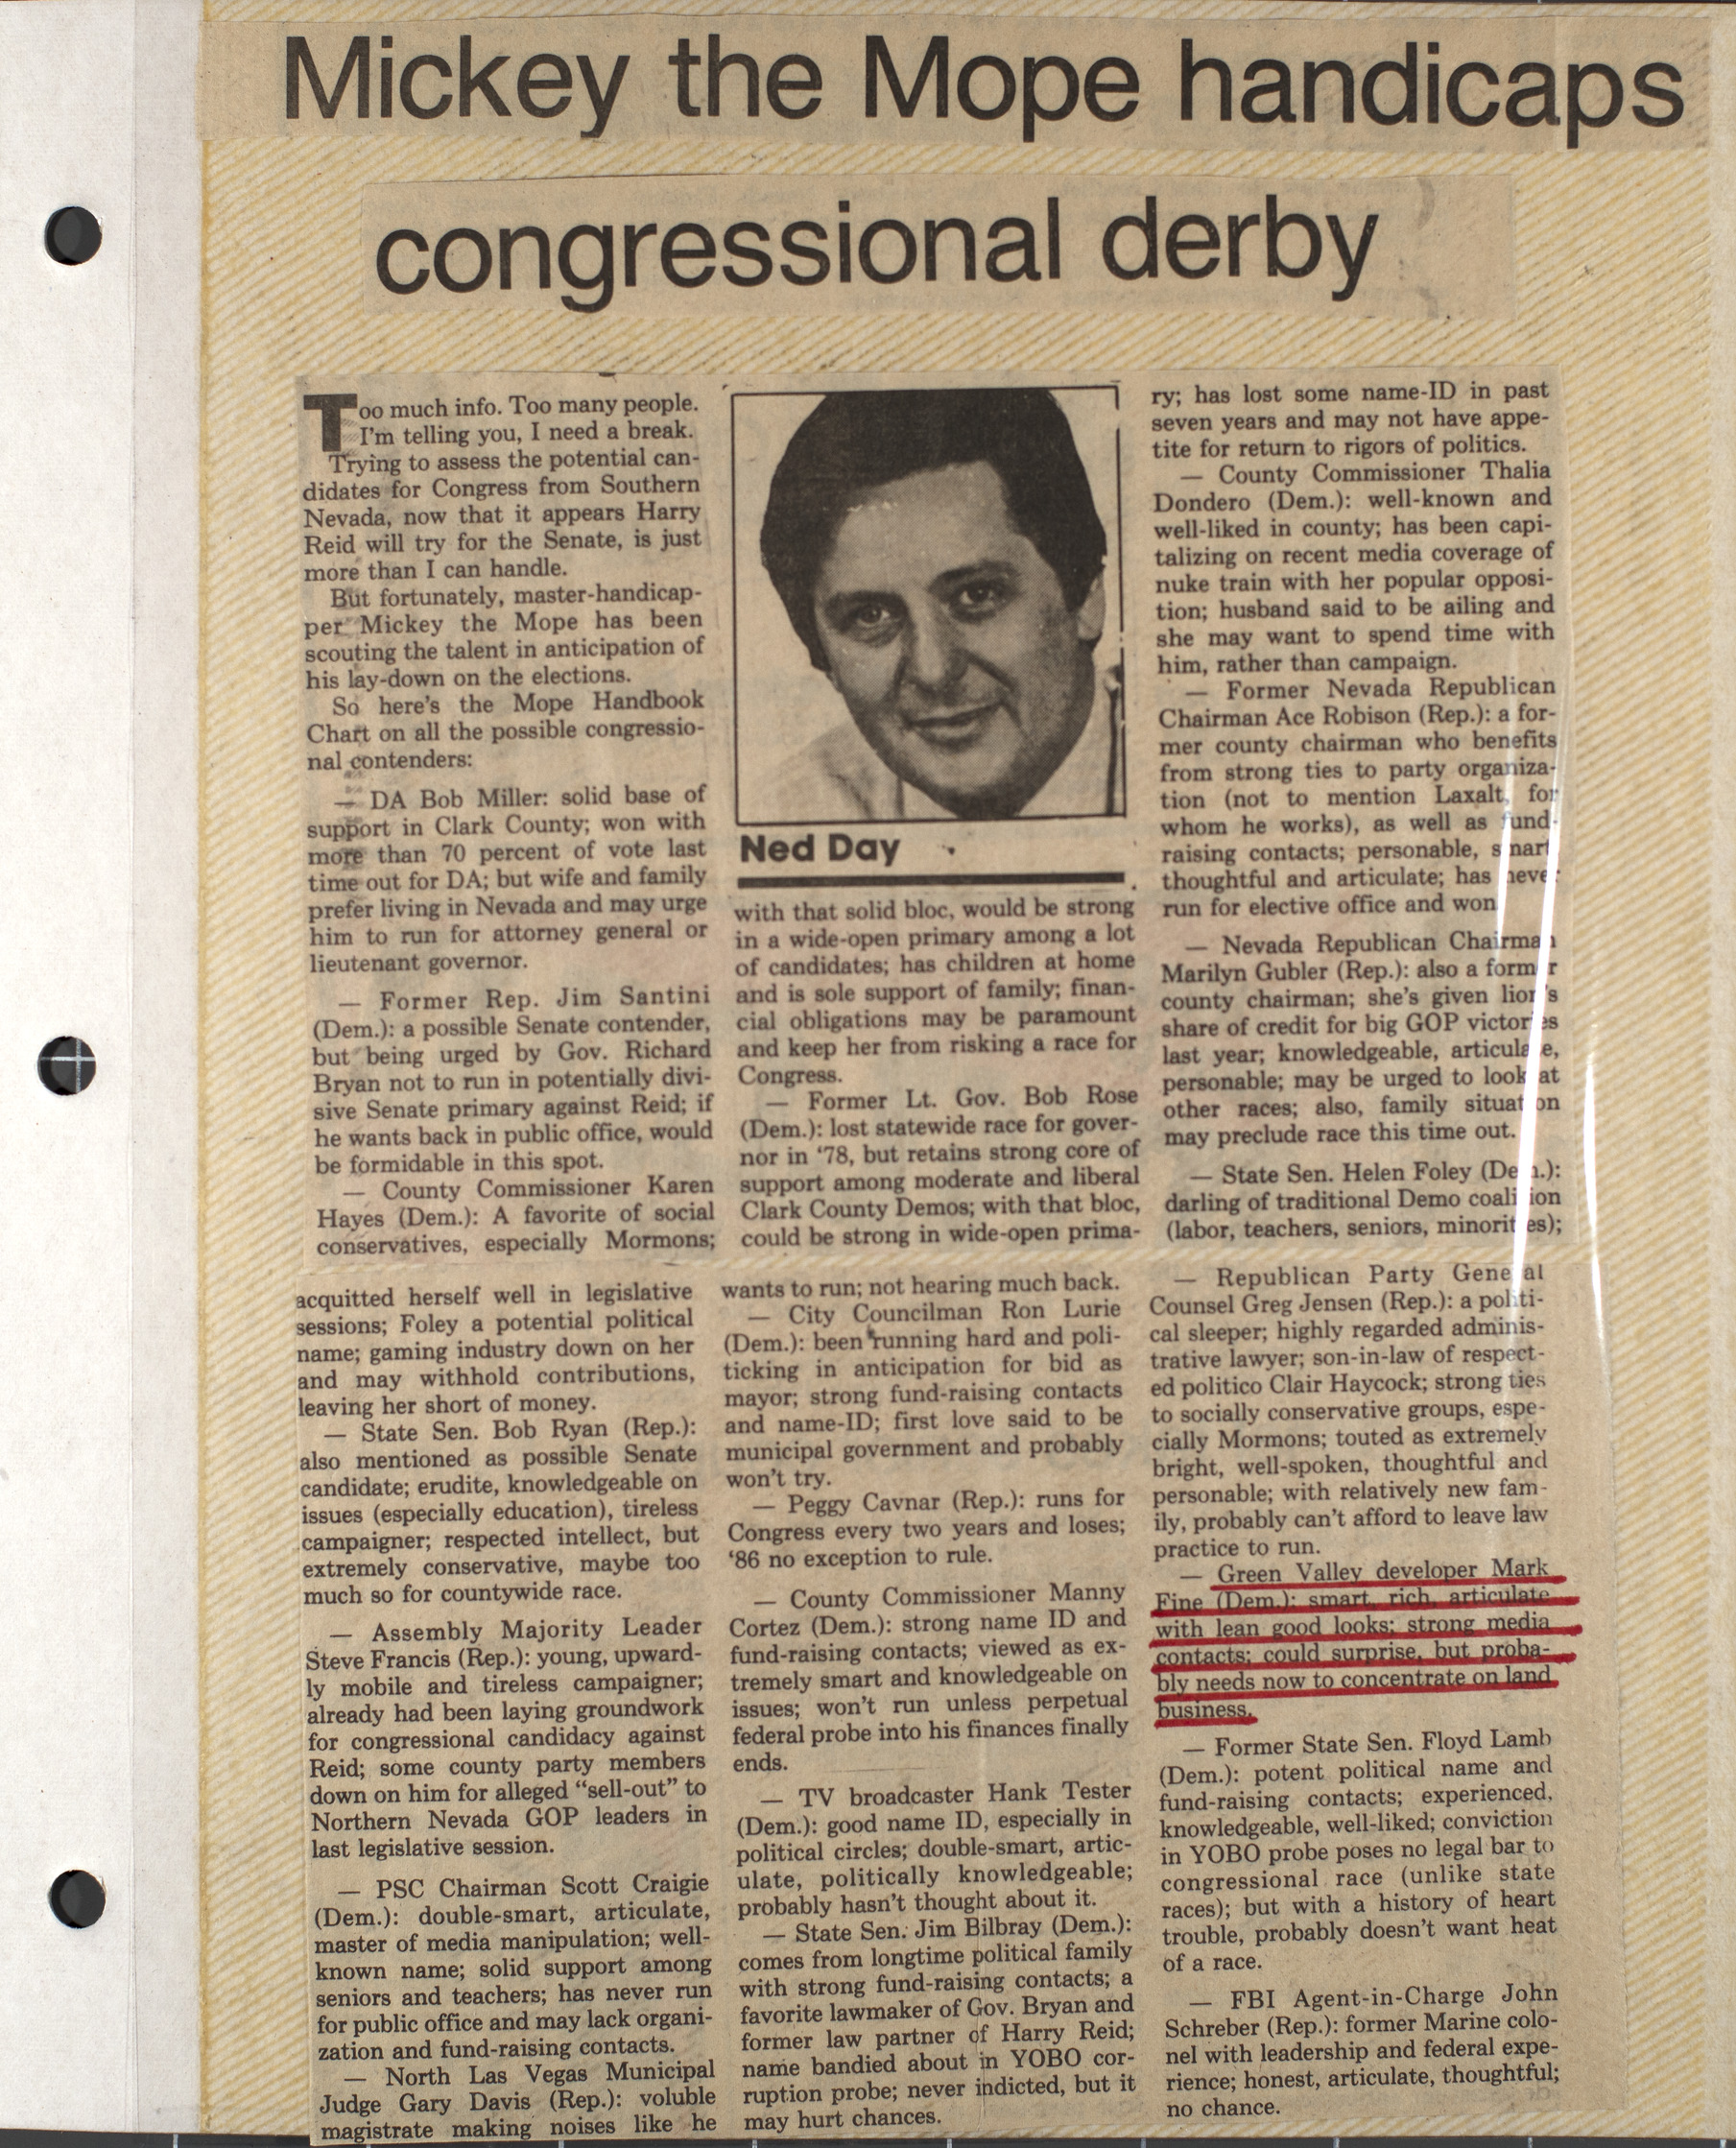 Newspaper clipping, Mickey the Mope handicaps congressional derby, Commentary section, Las Vegas Review-Journal, August 23, 1985